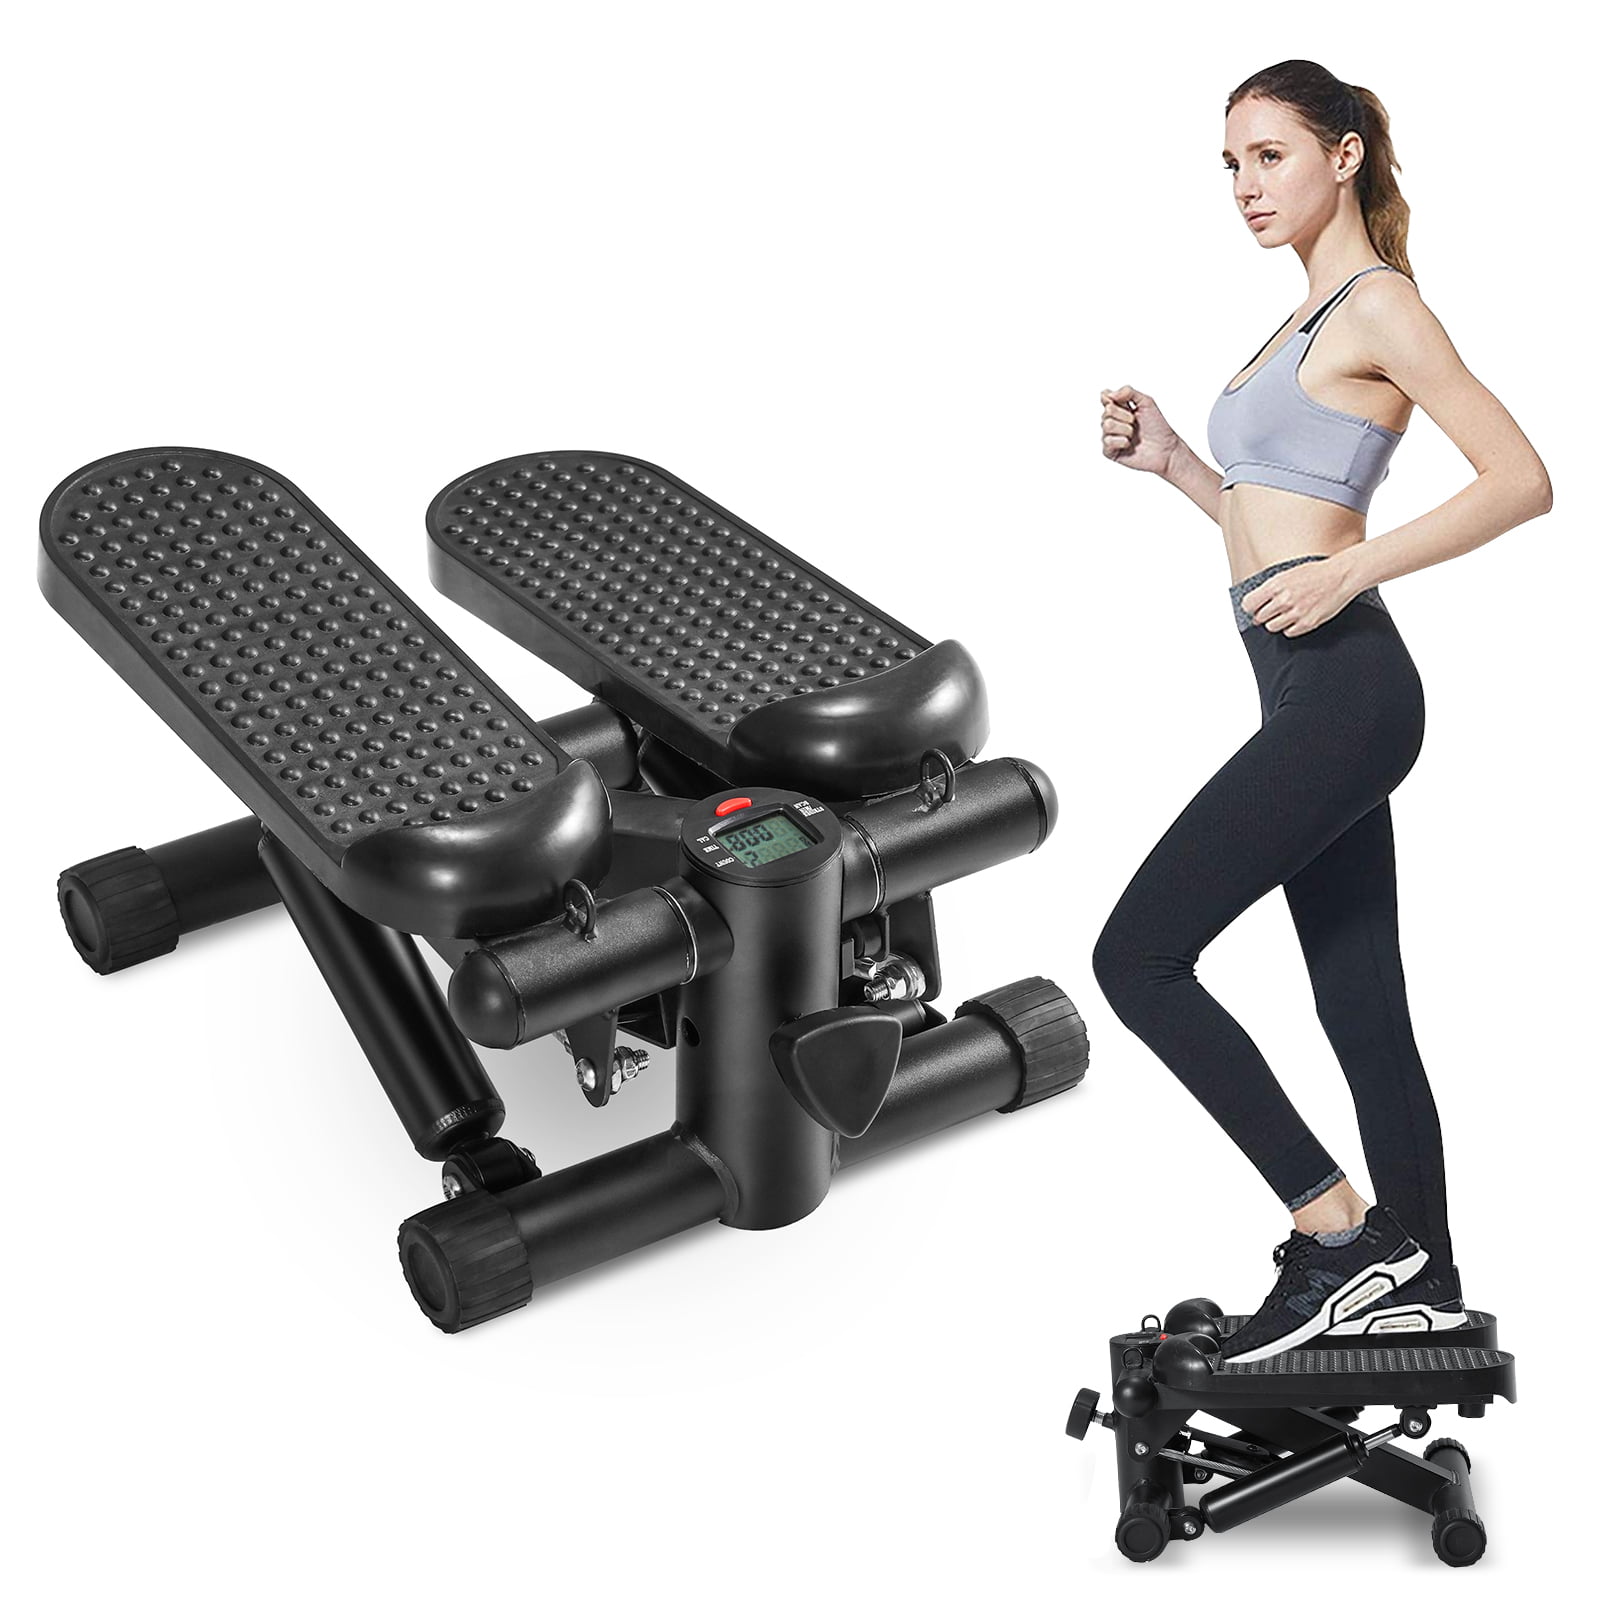 Built in Monitor Multicolor, 9 x 15.7 x 16.9 in Mini Silent Mountaineering Multi-Function Fitness Exercise Home Mini Stepper & Stair Climber Machine-Home Step Machine with Resistance Bands Set 